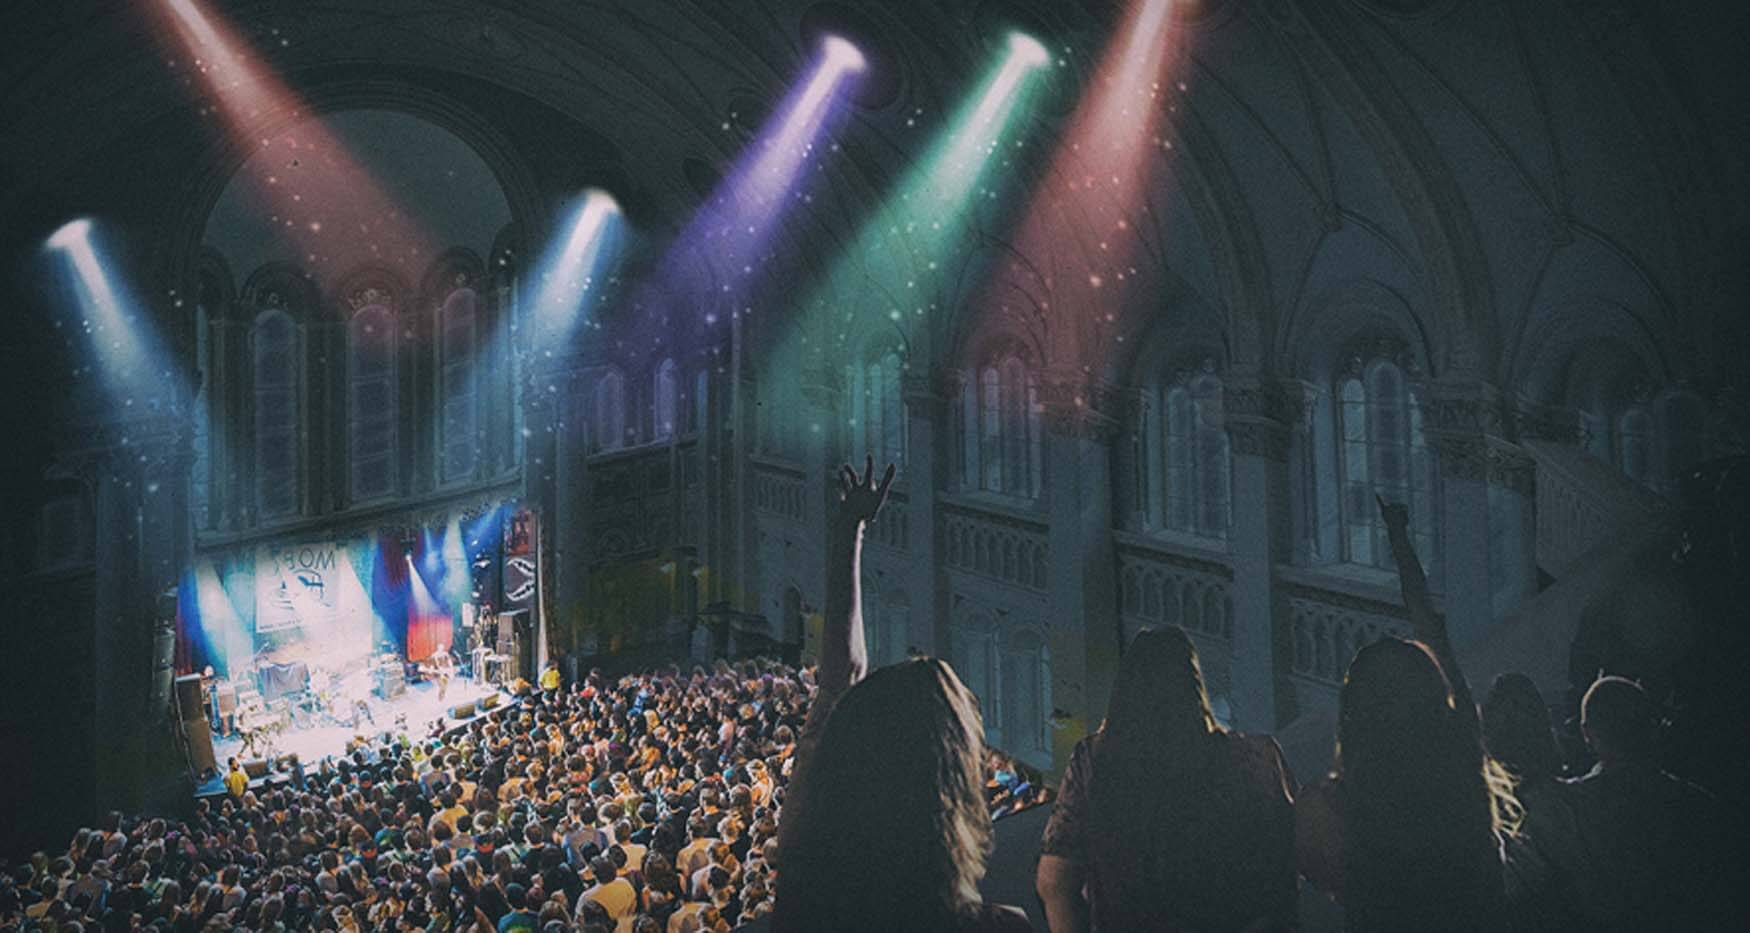 colorful lights and concert crowd inside church